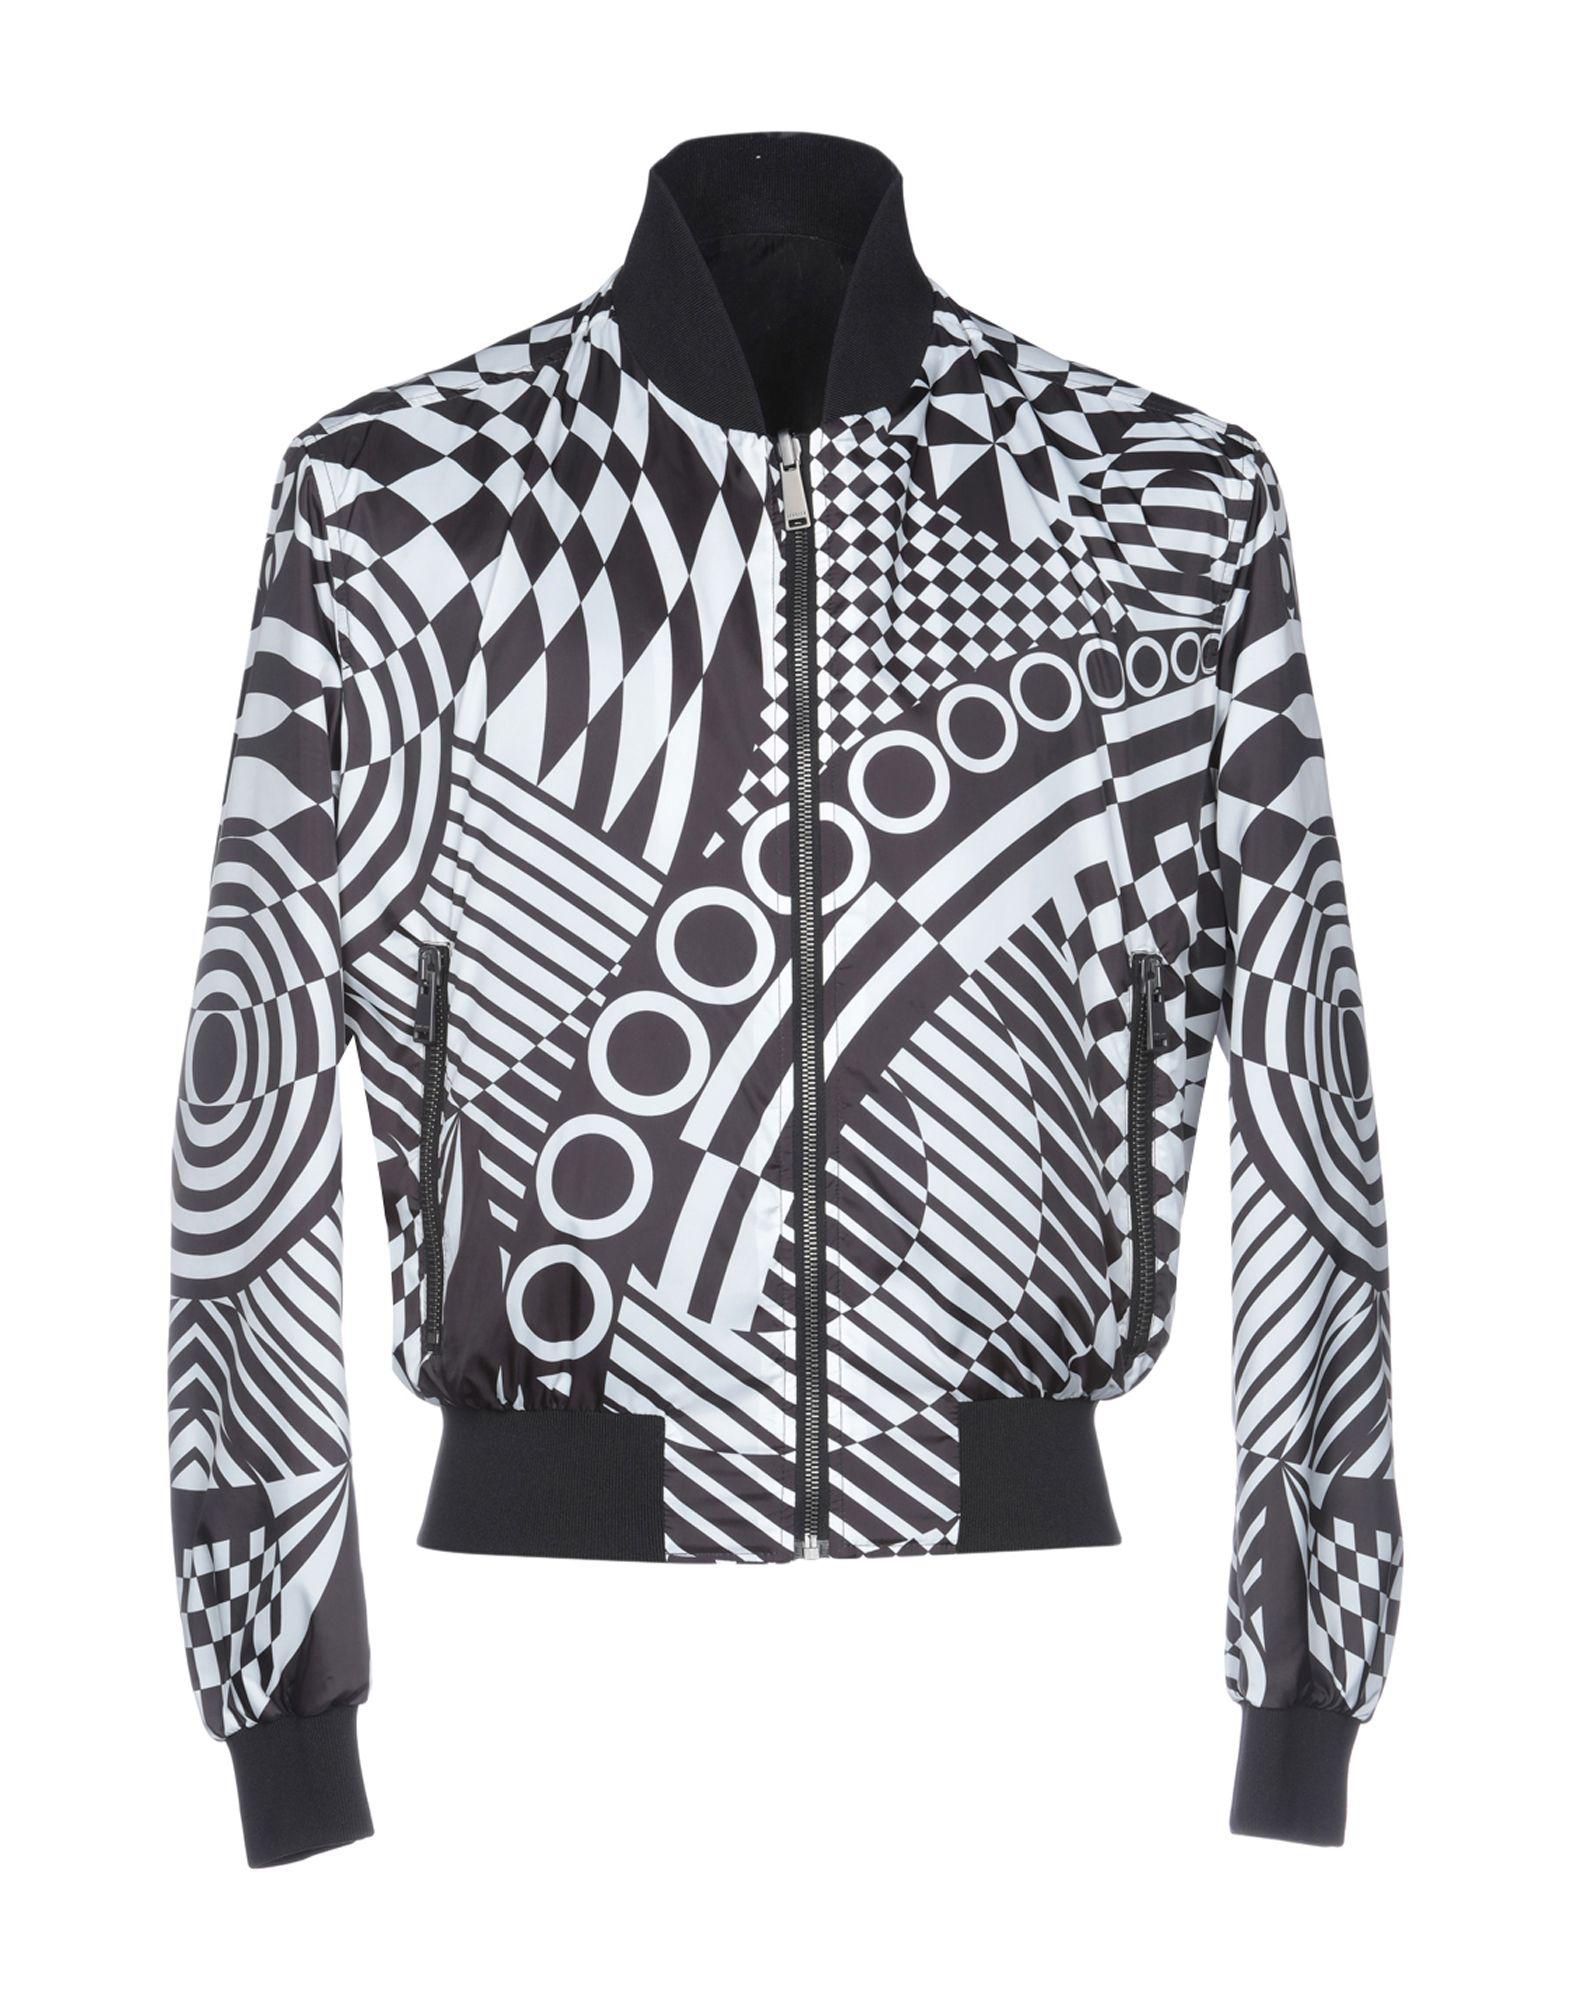 versace jacket black and white